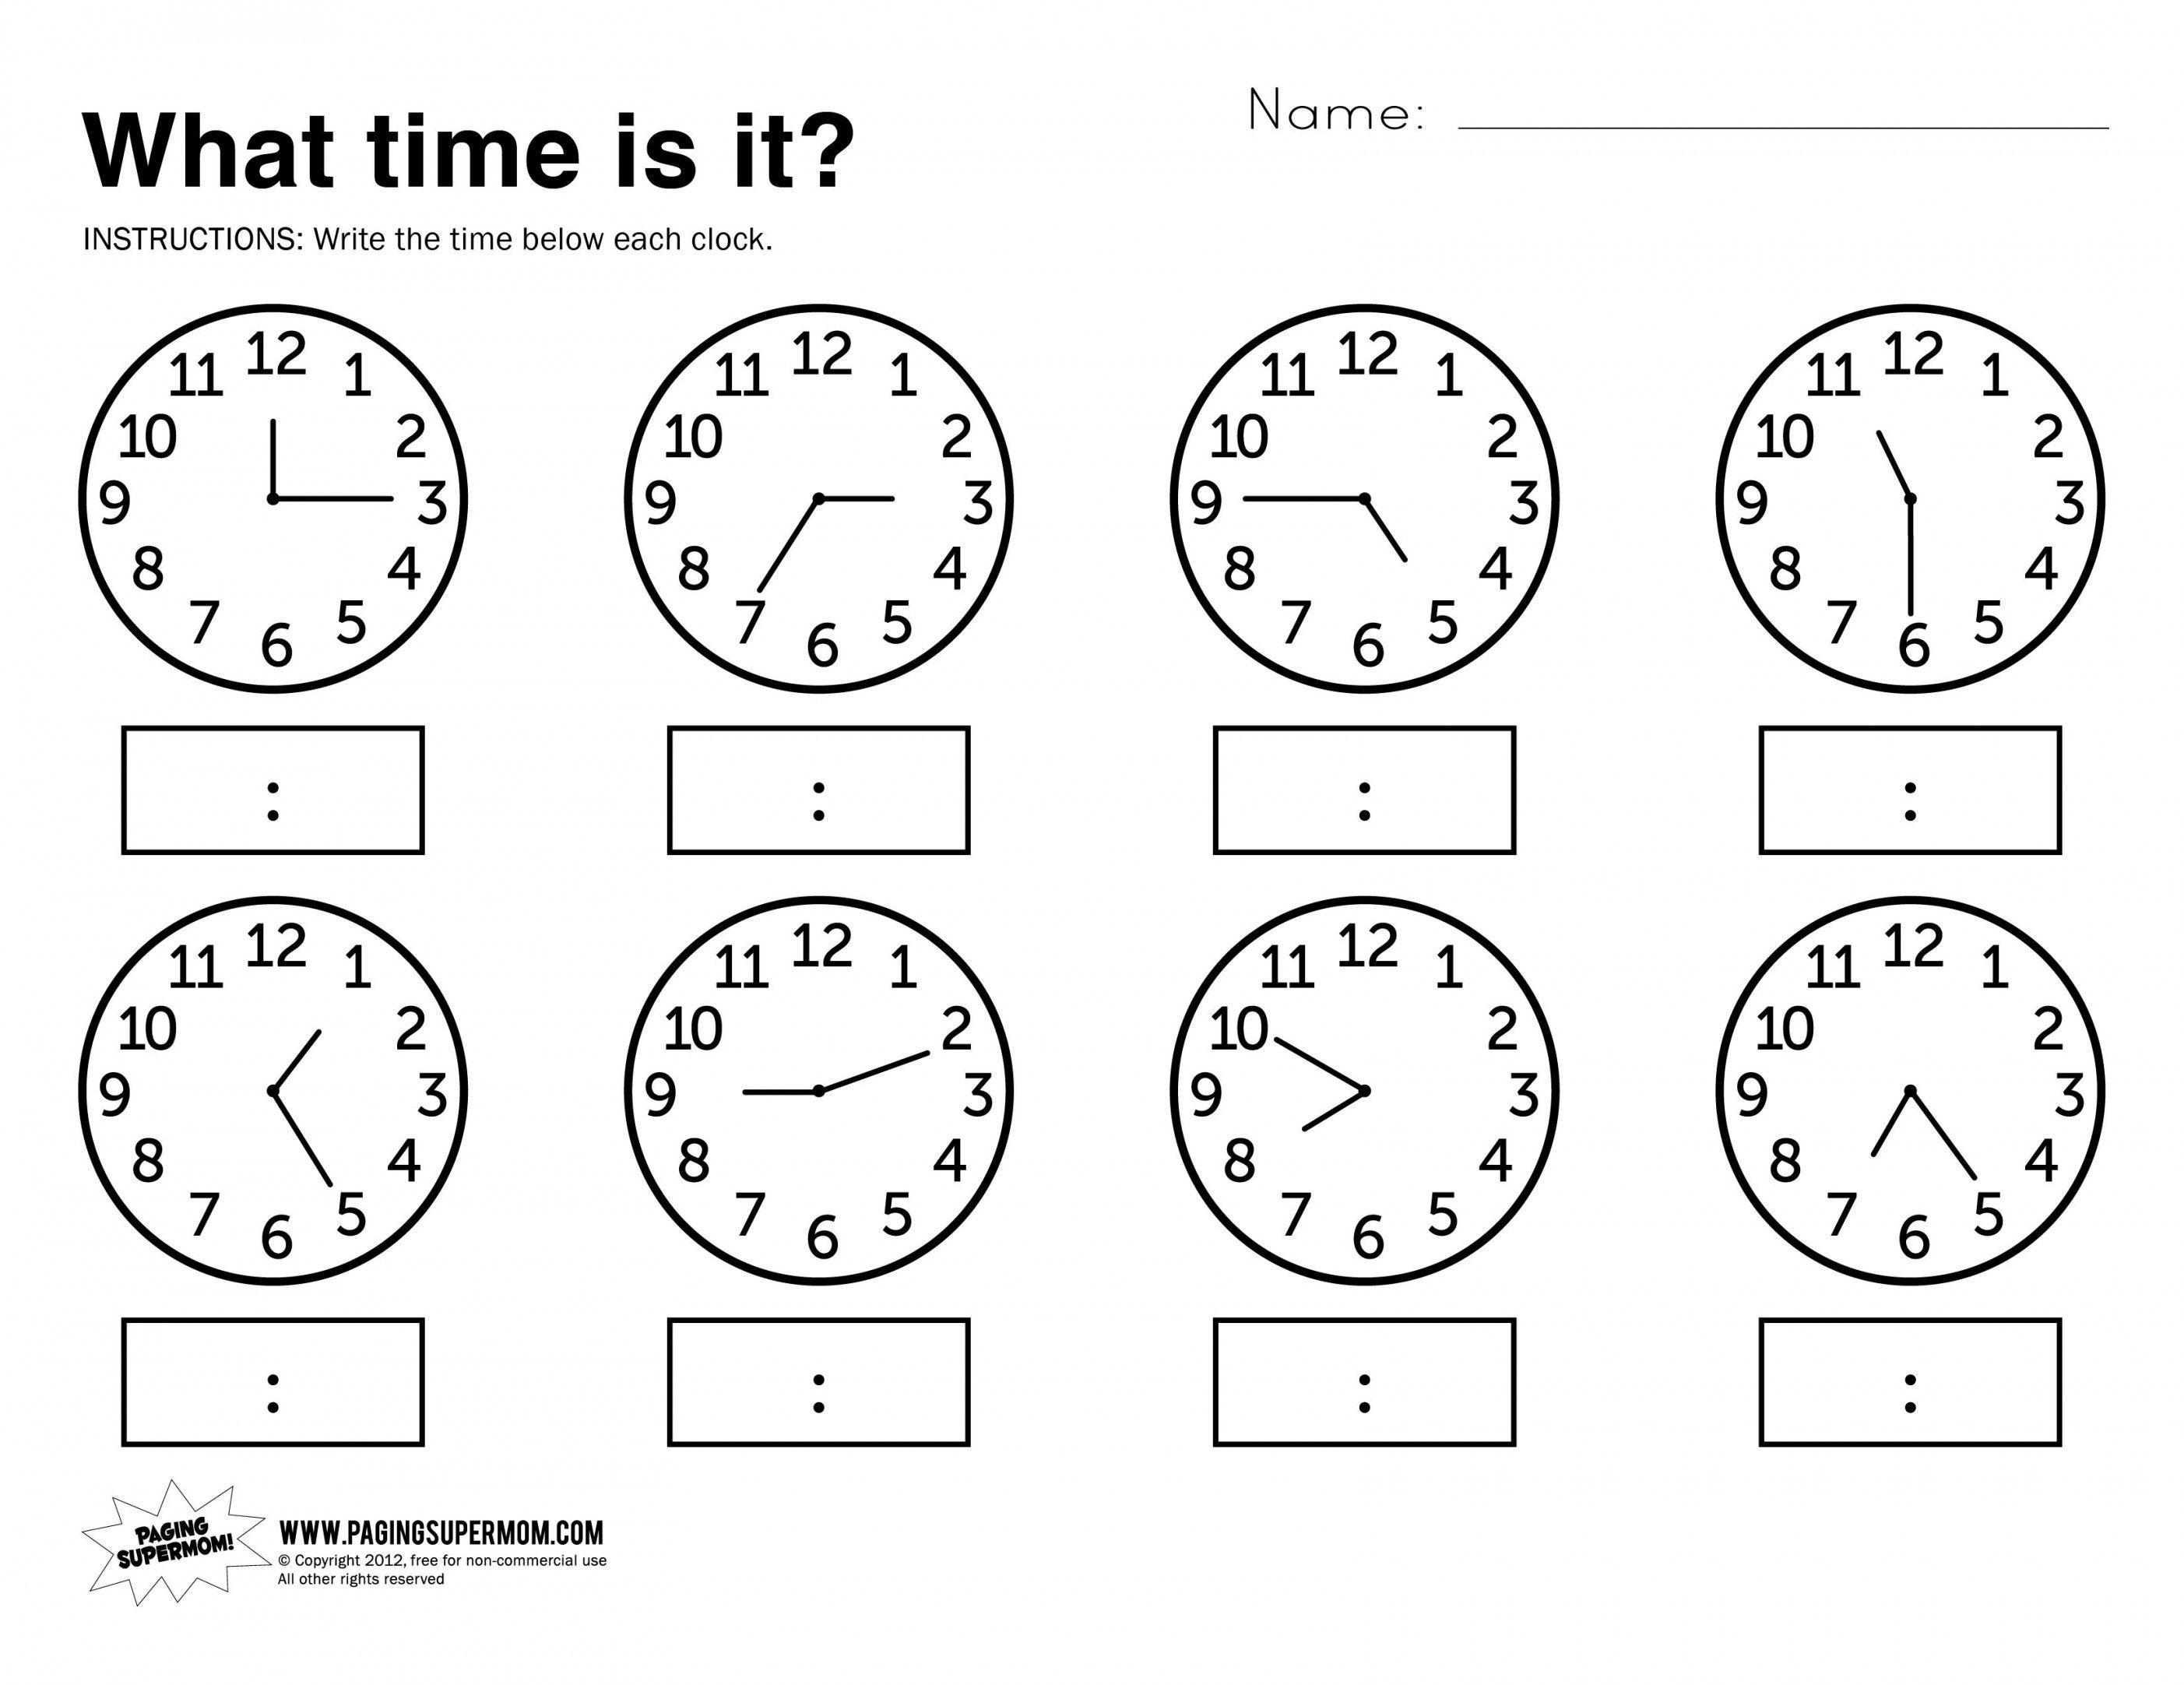 Telling Time Worksheets Grade 3 | Lostranquillos - Free Printable Time Worksheets For Grade 3